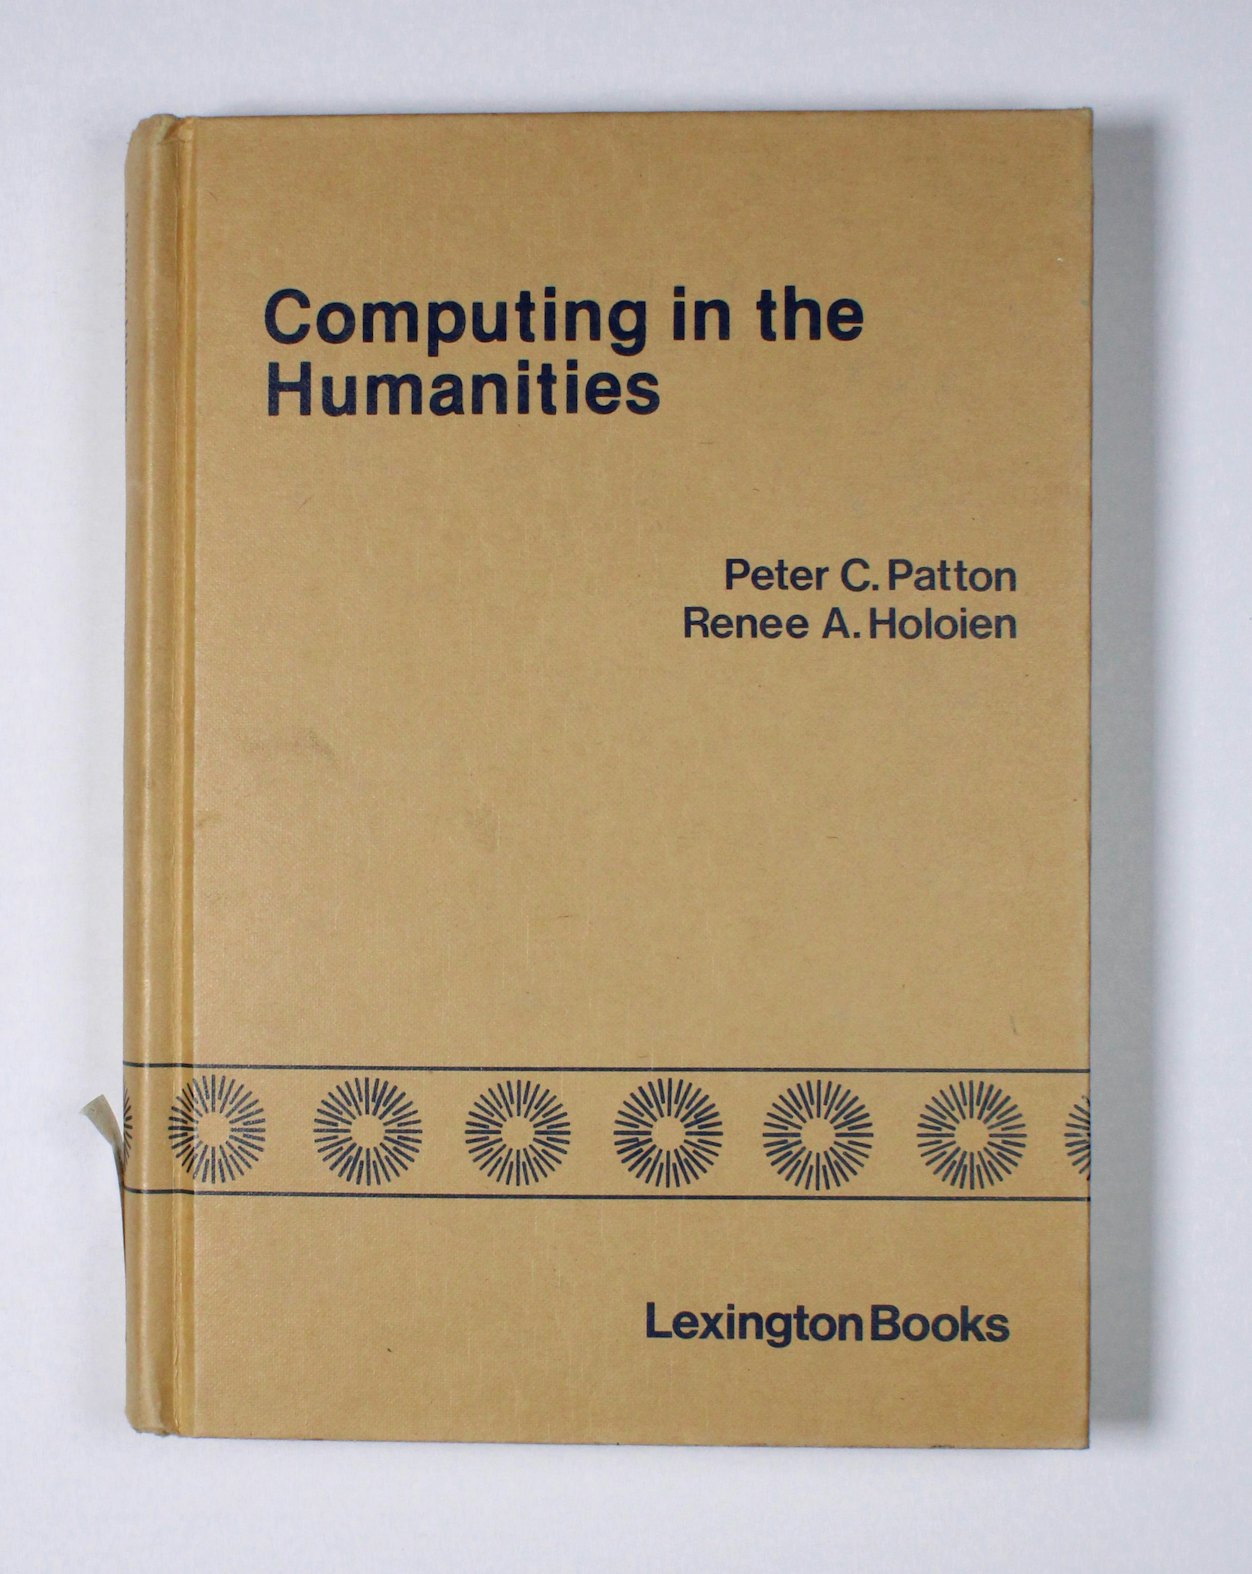 Computing in the Humanities